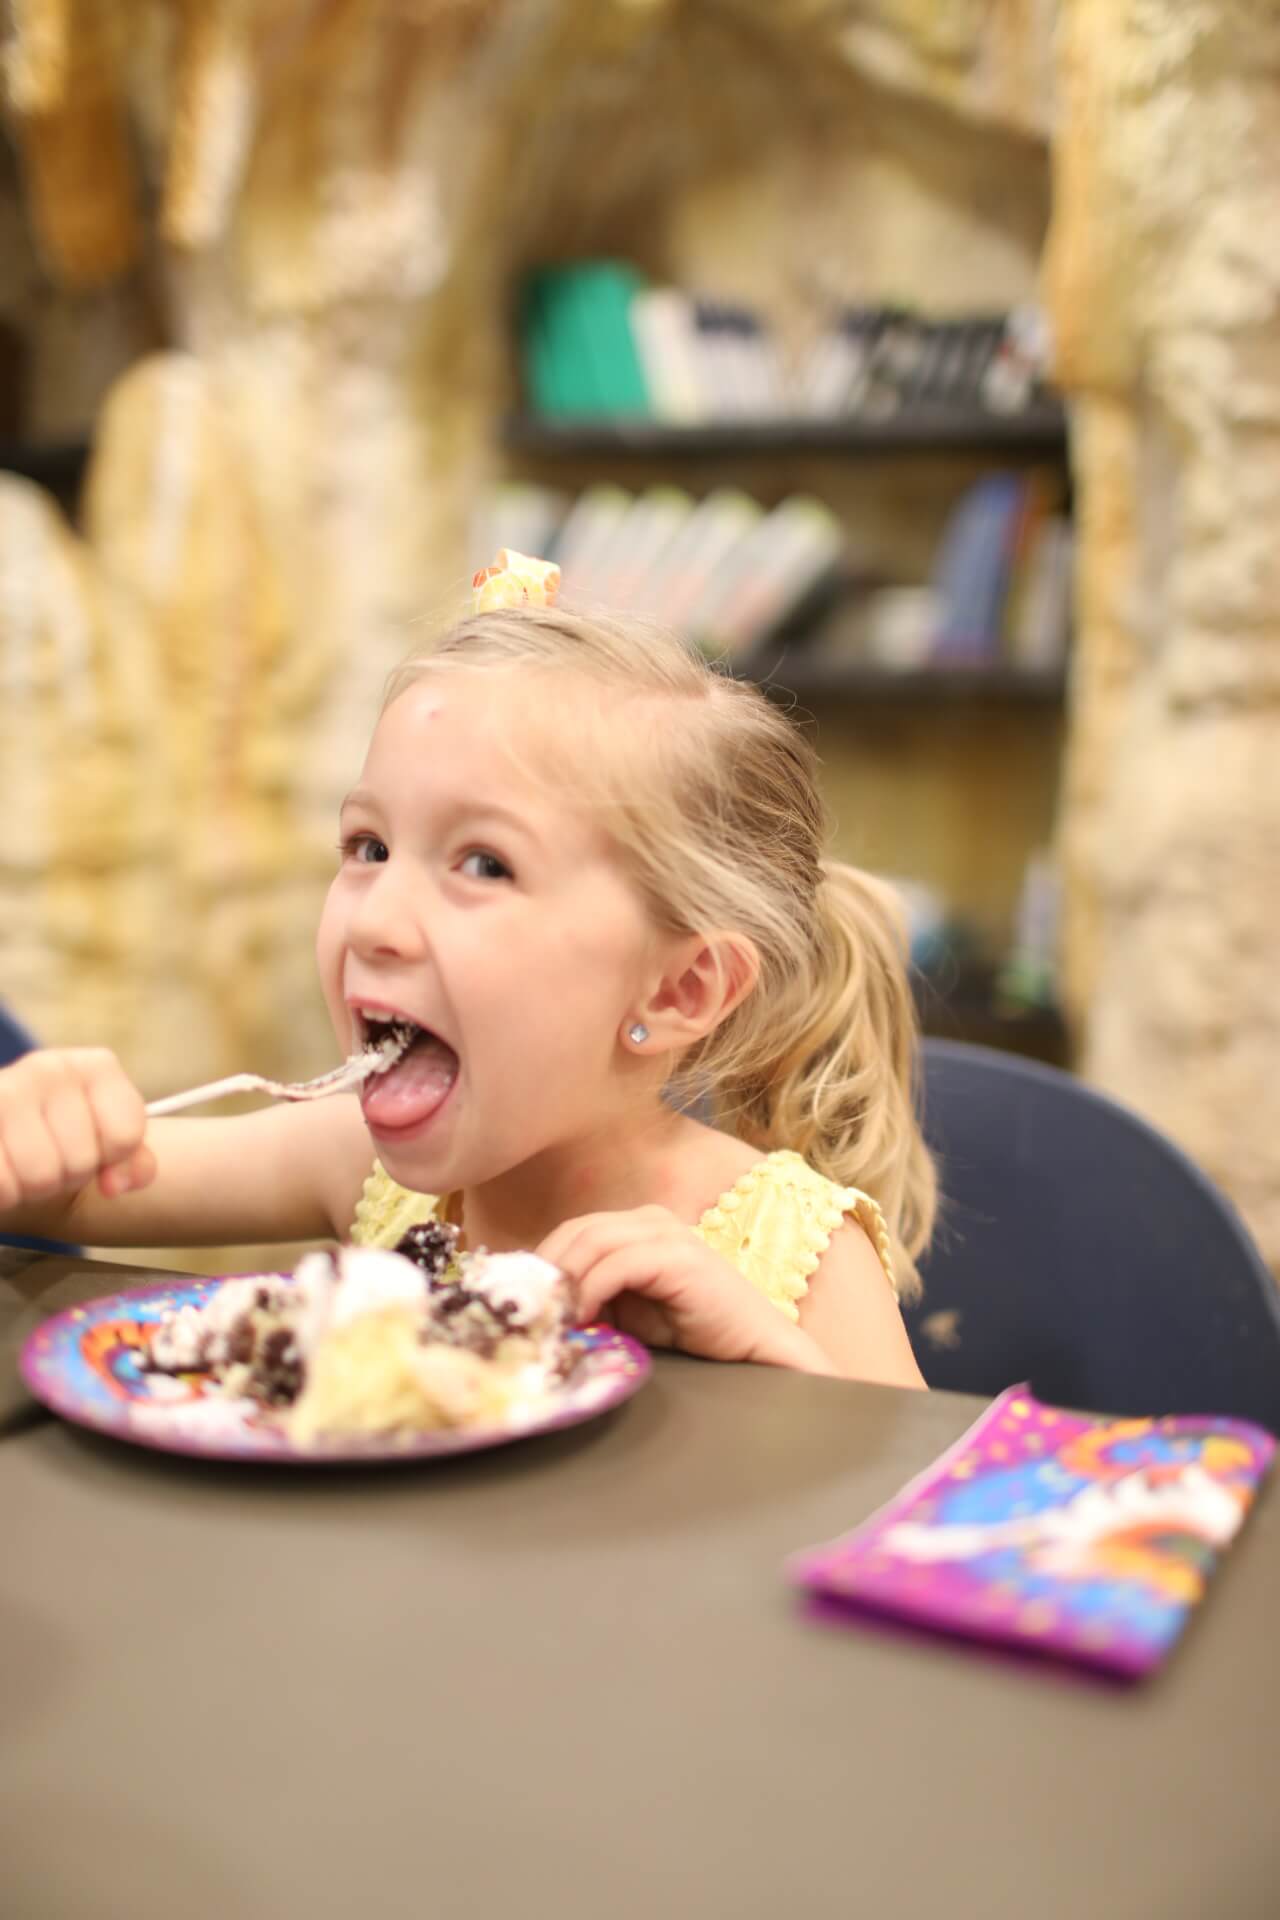 Girl excitedly eats a piece of birthday cake.